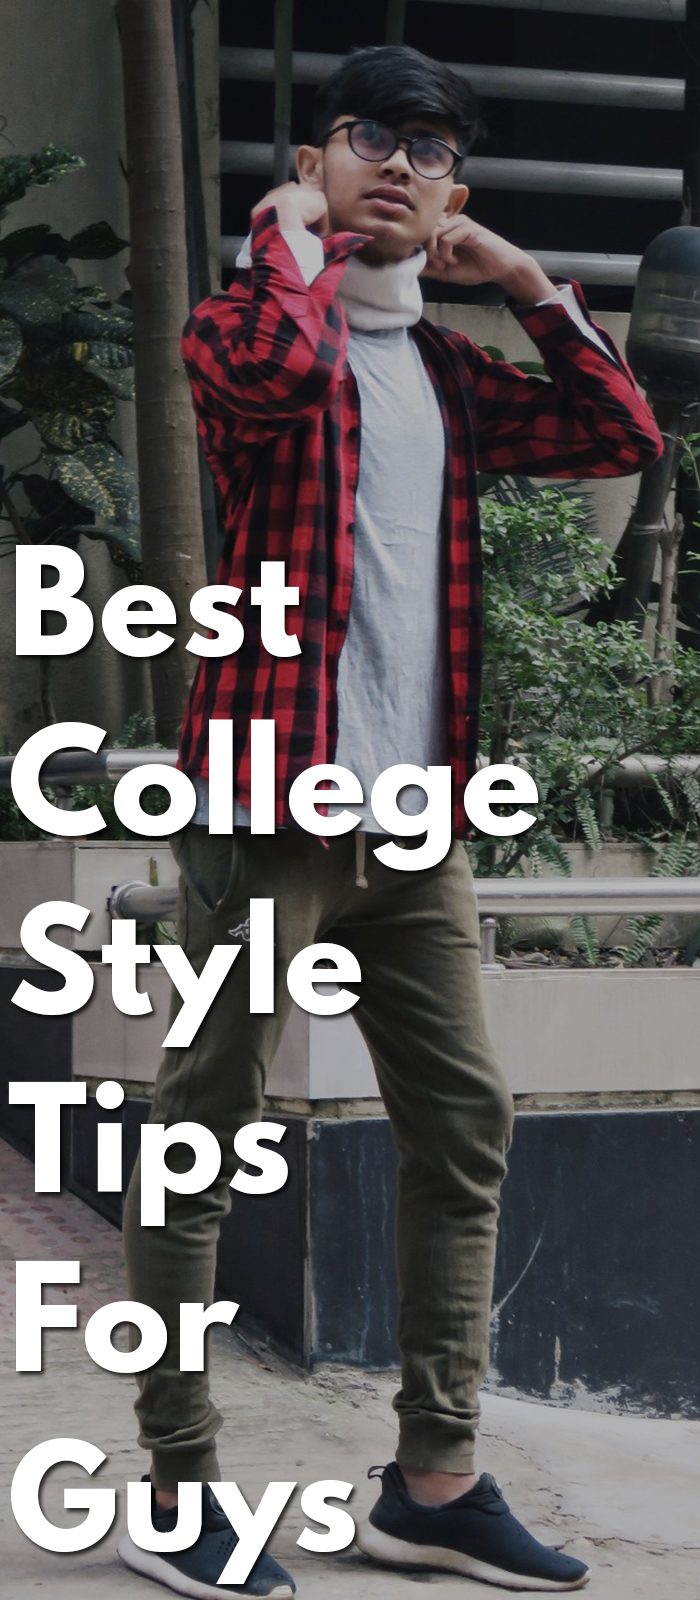 Best-College-Style-Tips-For-Guys. ⋆ Best Fashion Blog For Men 